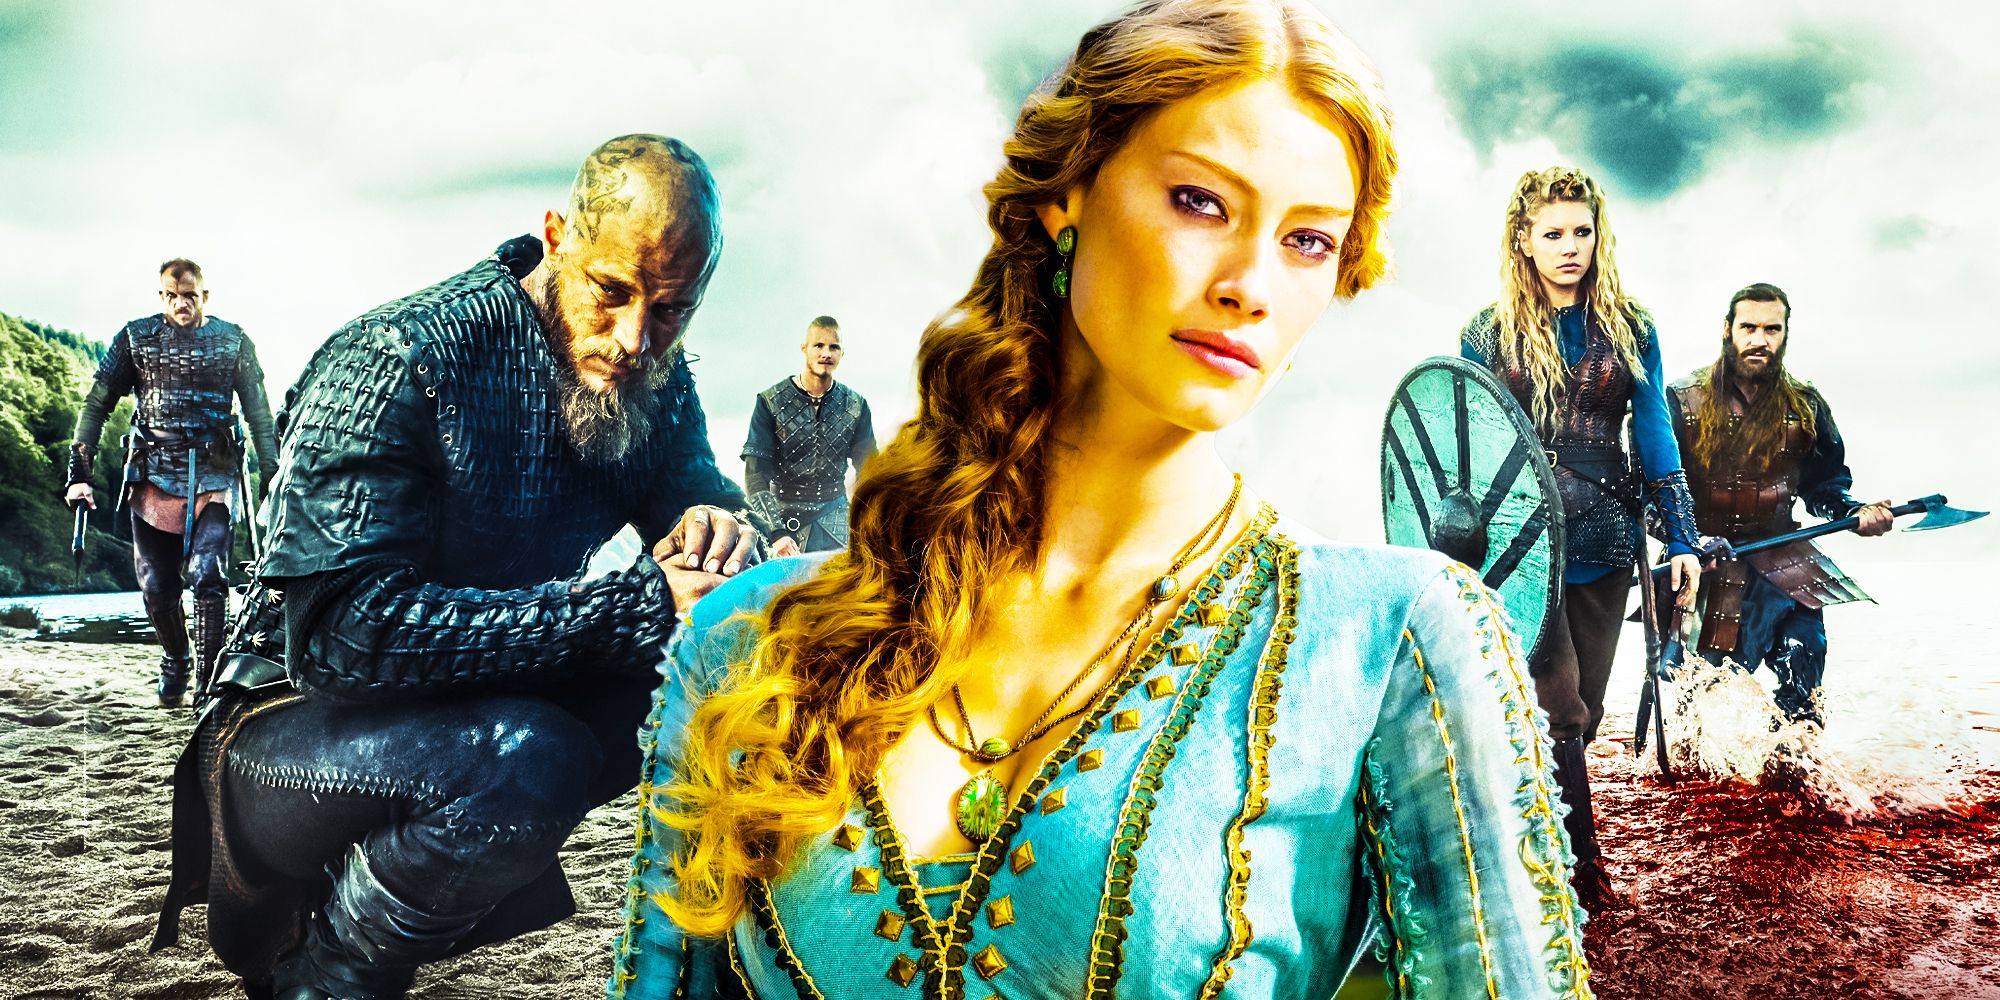 Vikings Princess Aslaug why most characters did not age